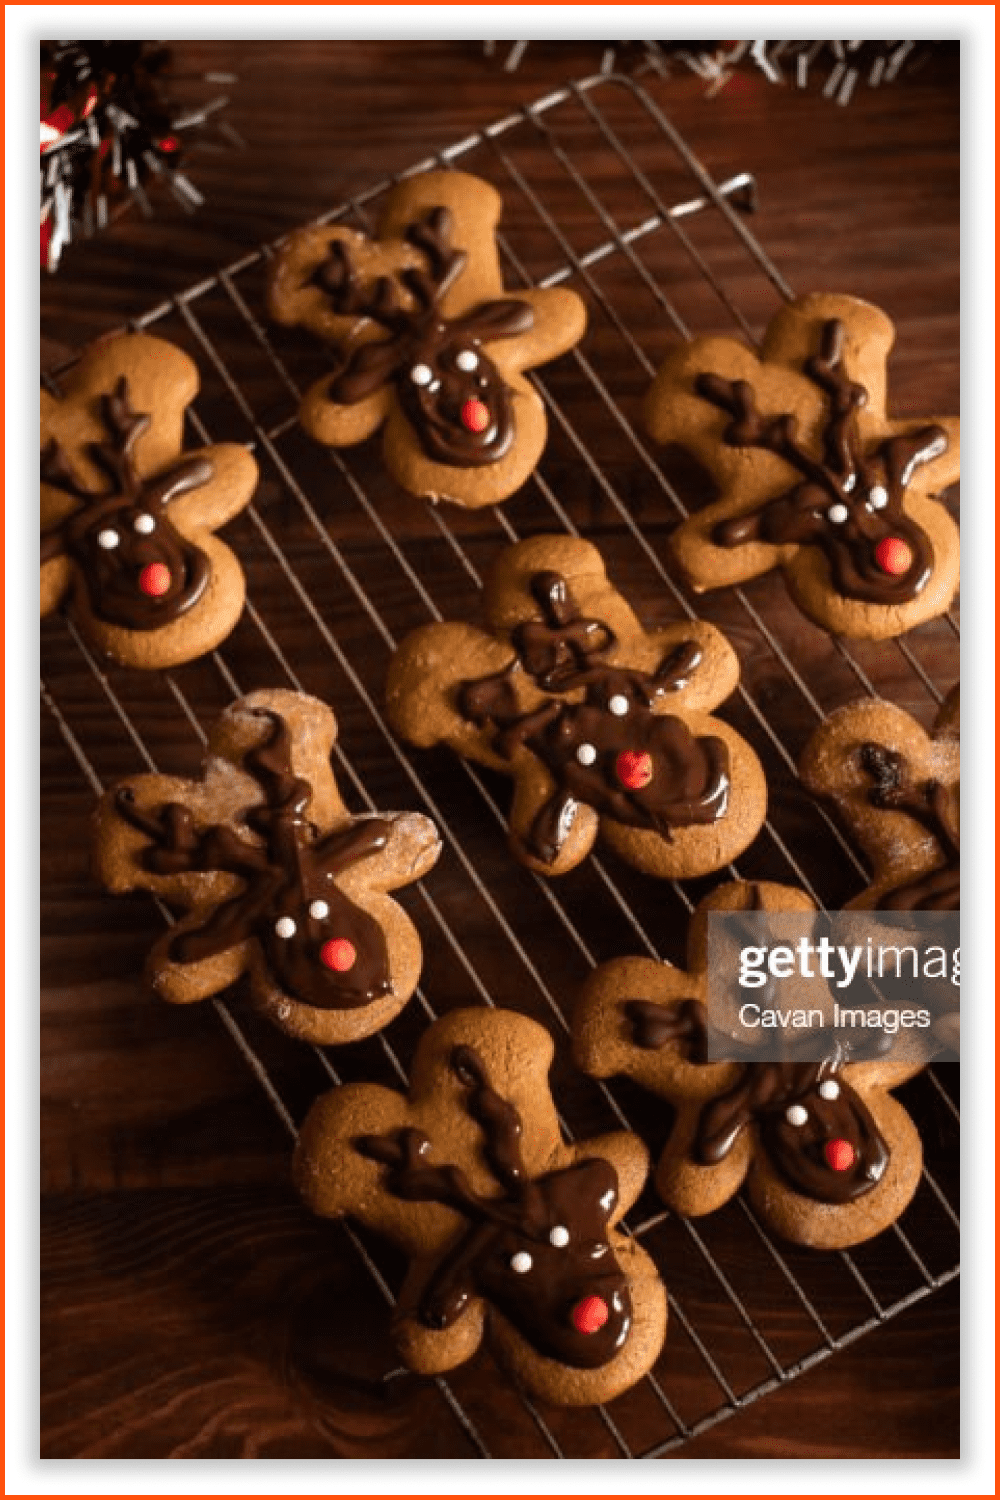 A photo of festive cookies in a shape of deer with chocolate on the top.